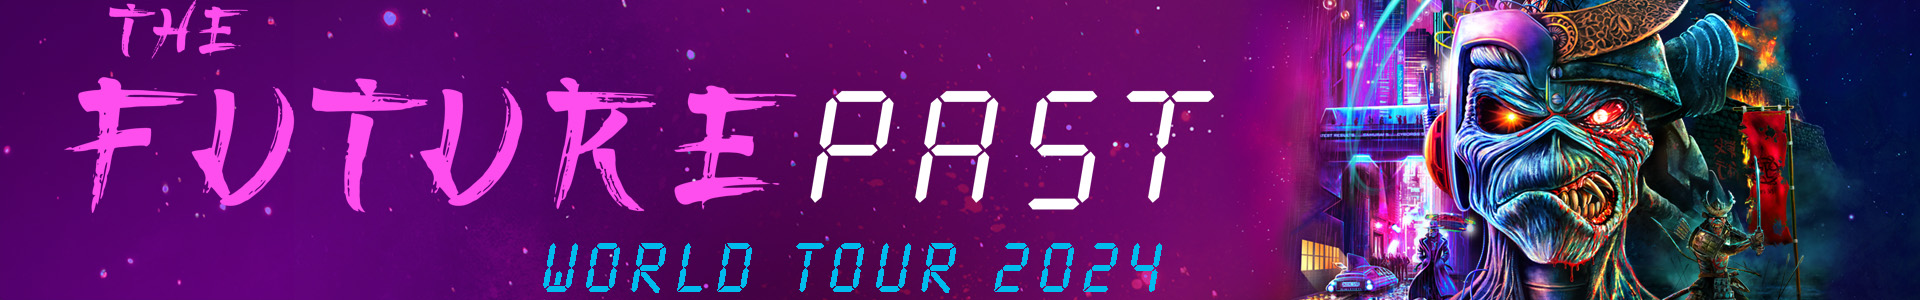 USA, Canada & Chile shows added to The Future Past Tour 2024